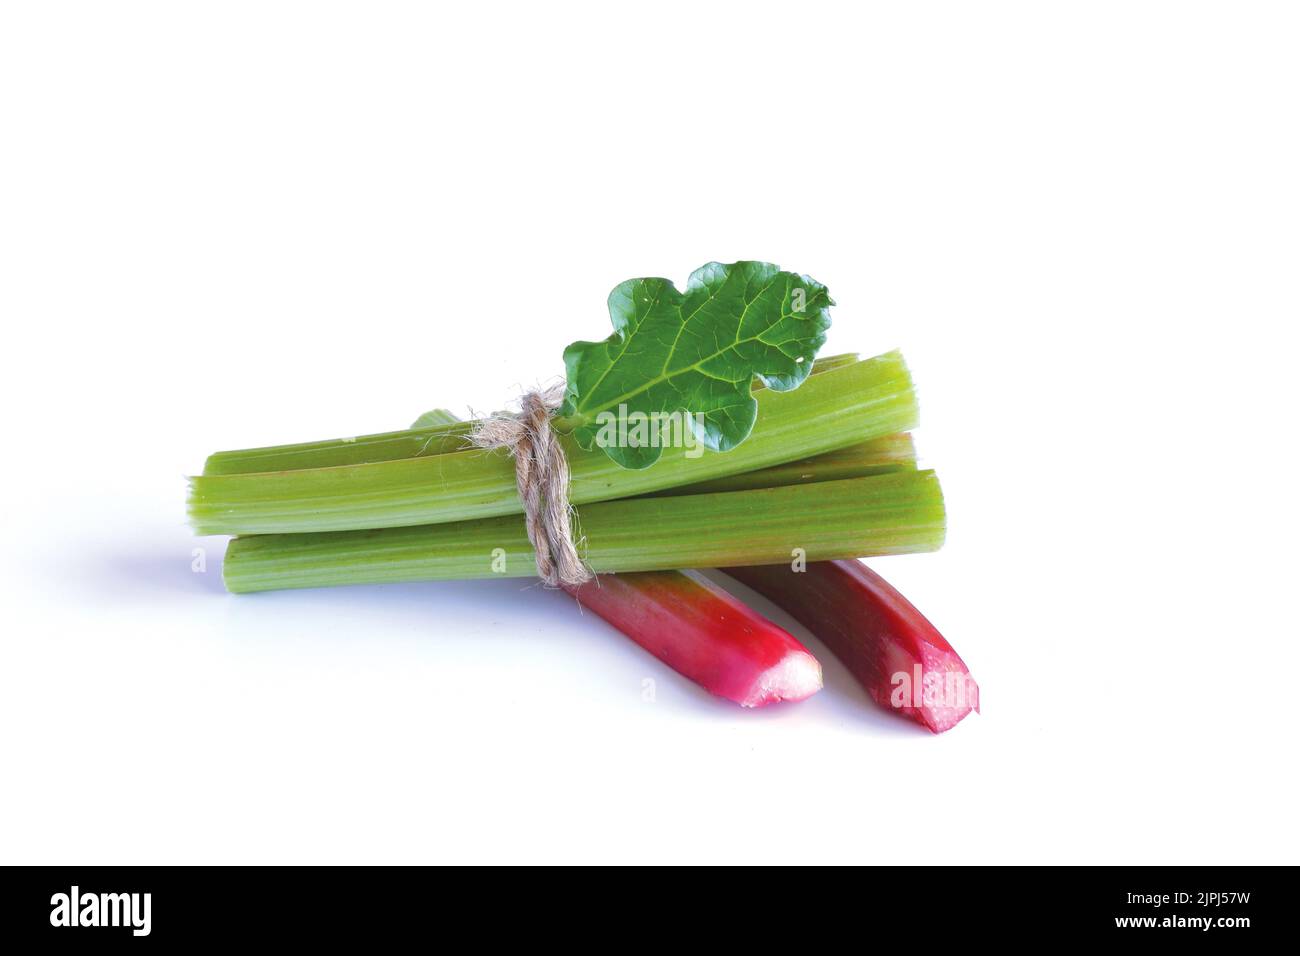 Red and green rhubarb stalks with a green leaf, tied with twine on a white background. Stock Photo